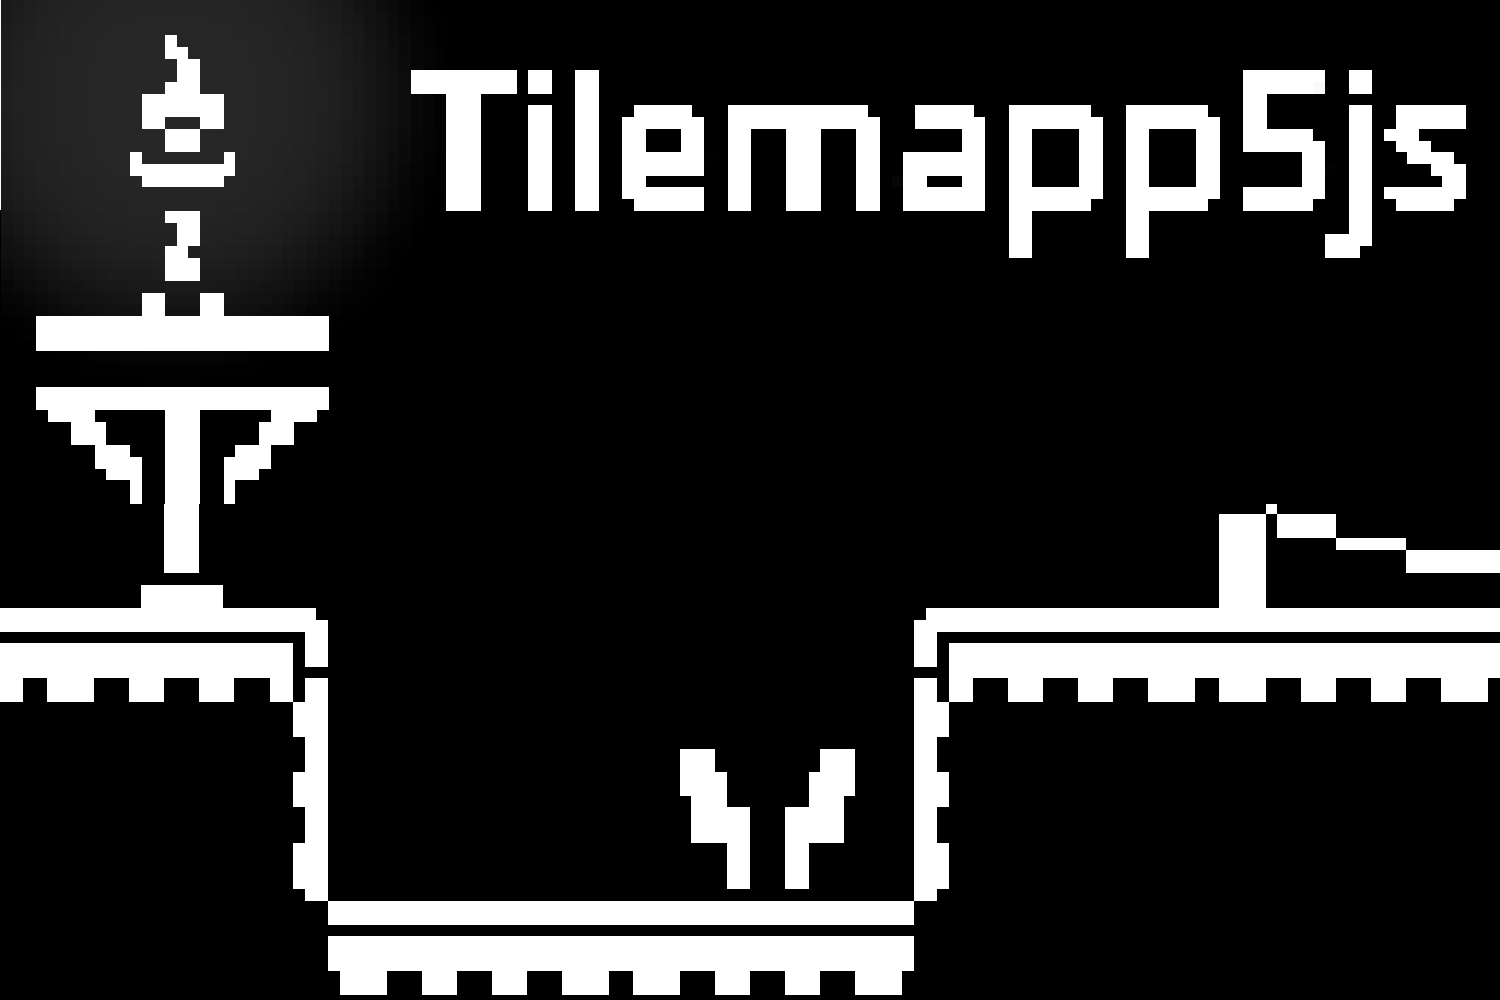 A Tilemapp5js tilemap with the Tilemapp5js name in the top right